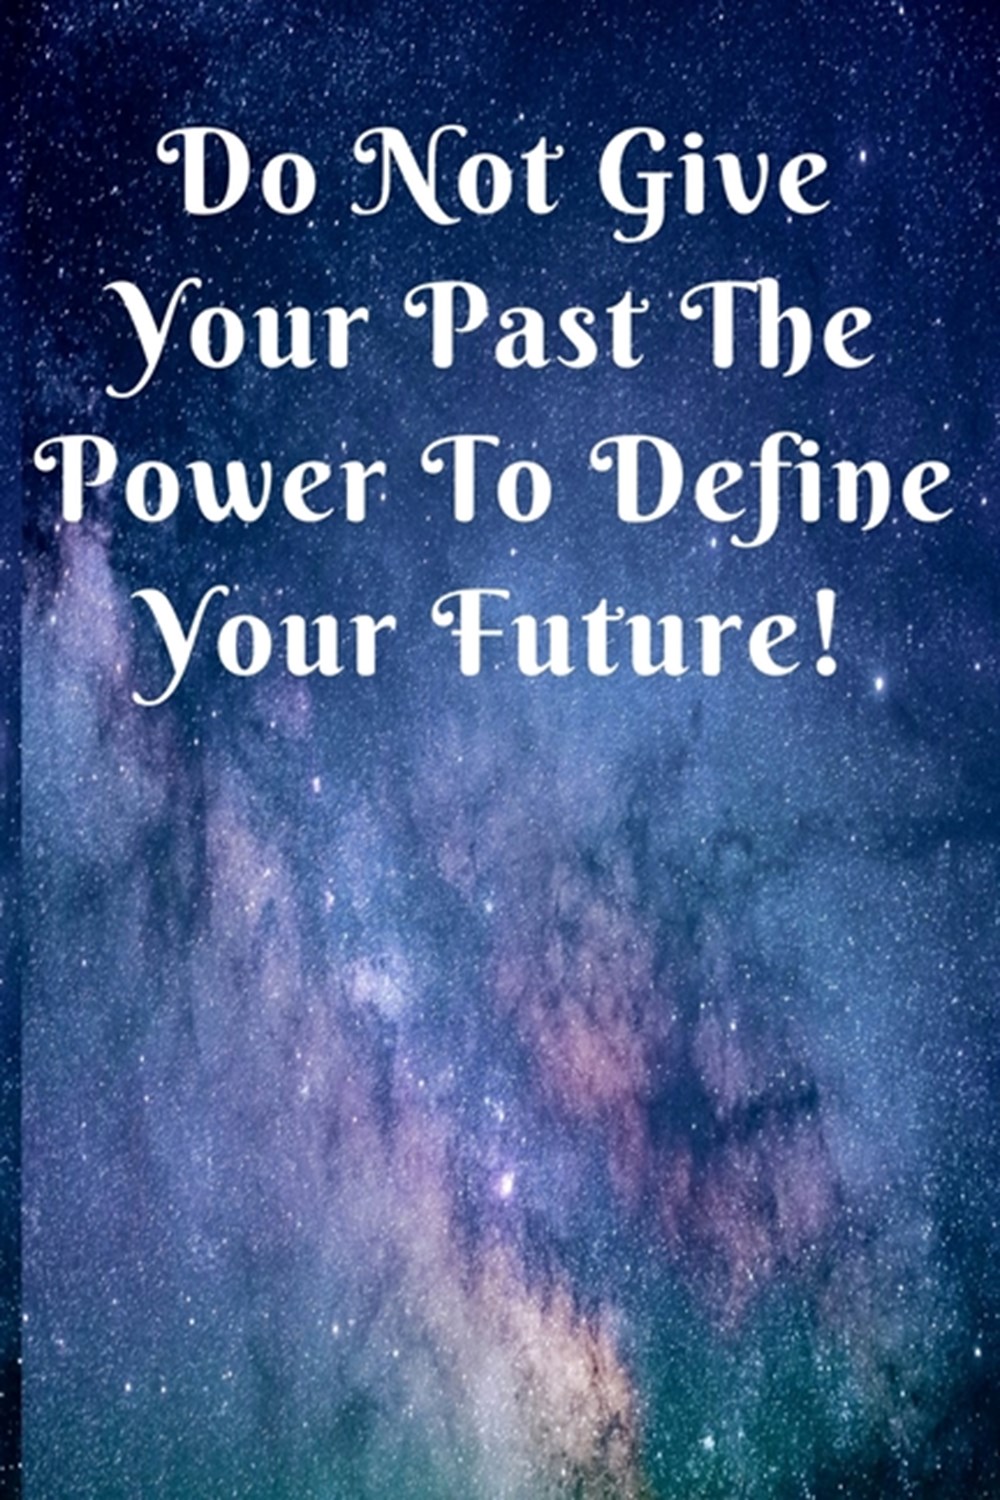 Do Not Give Your Past The Power To Define Your Future! Inspiring Motivational Cosmic Colorful Journa